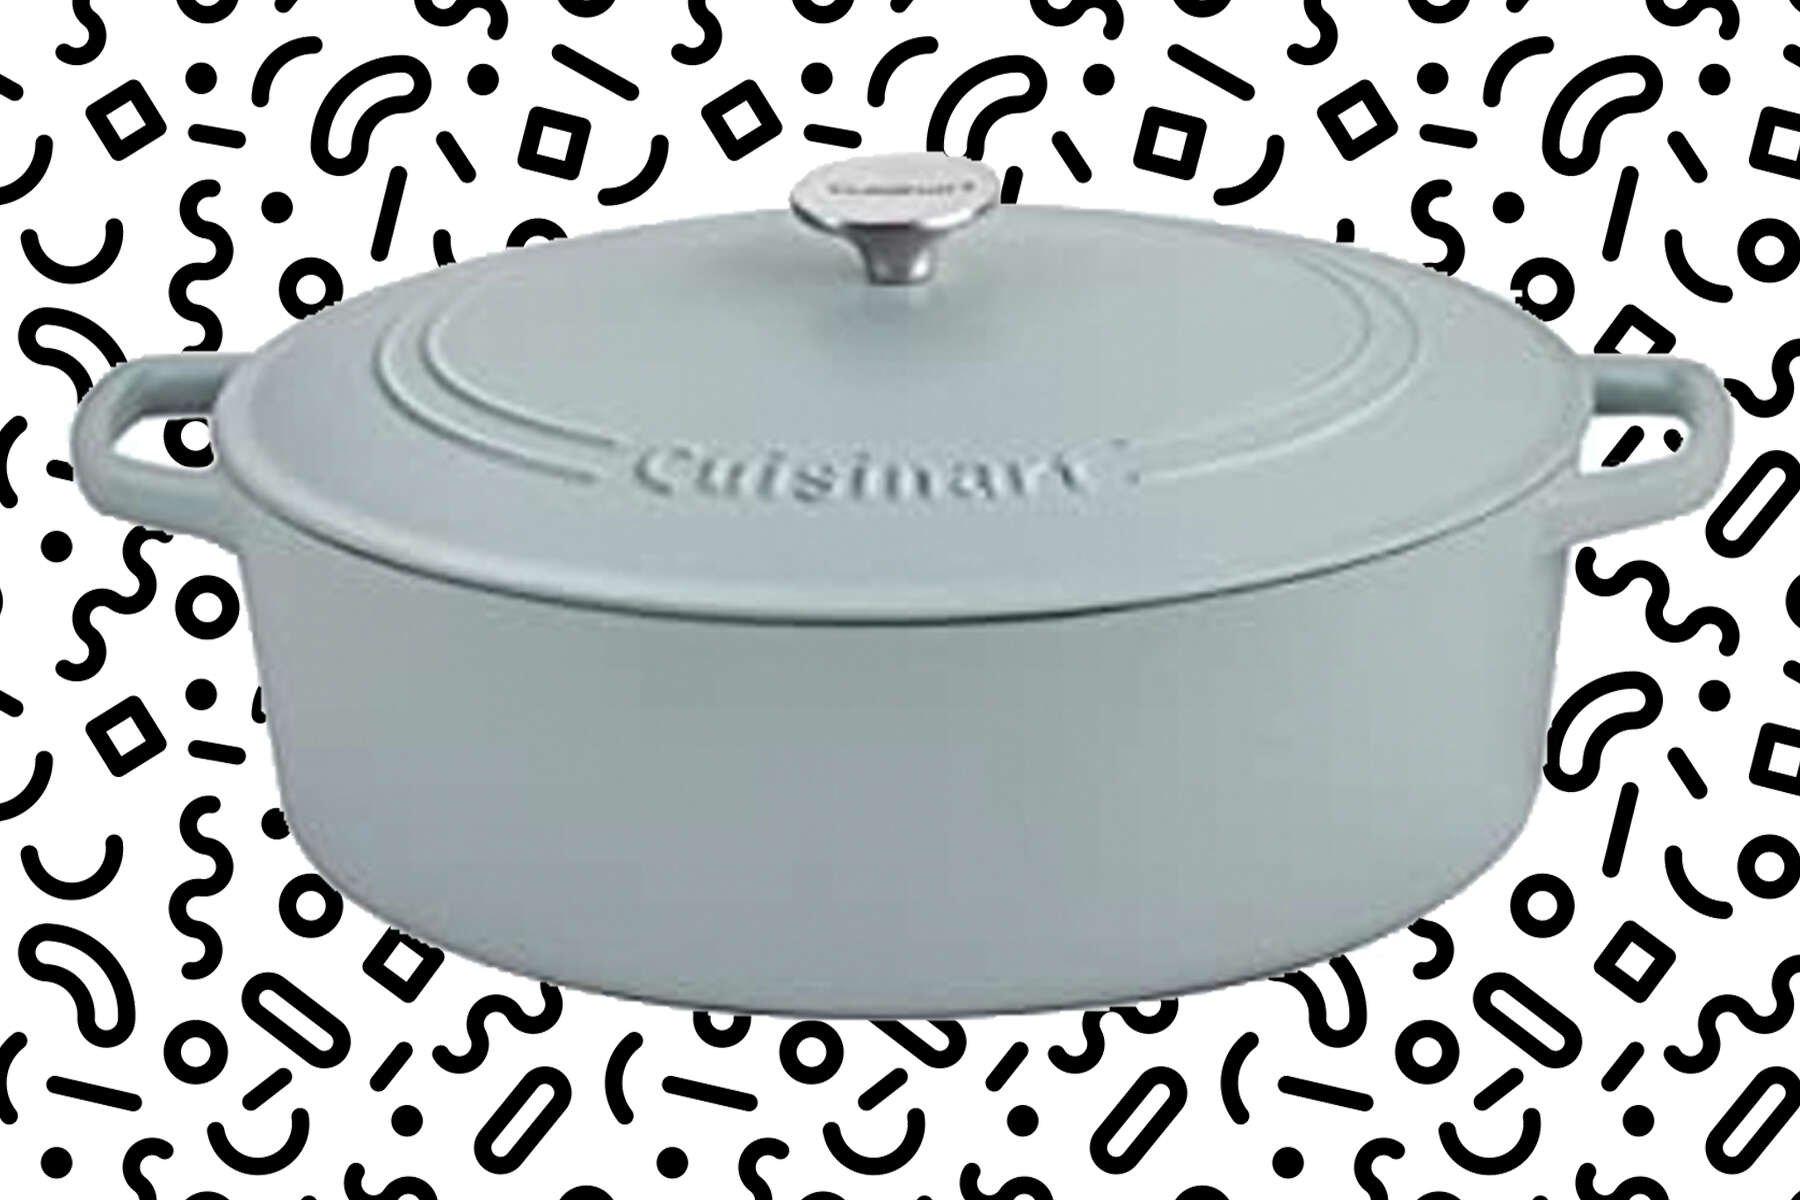 Cuisinart's 7-quart dutch oven is only $60 right now